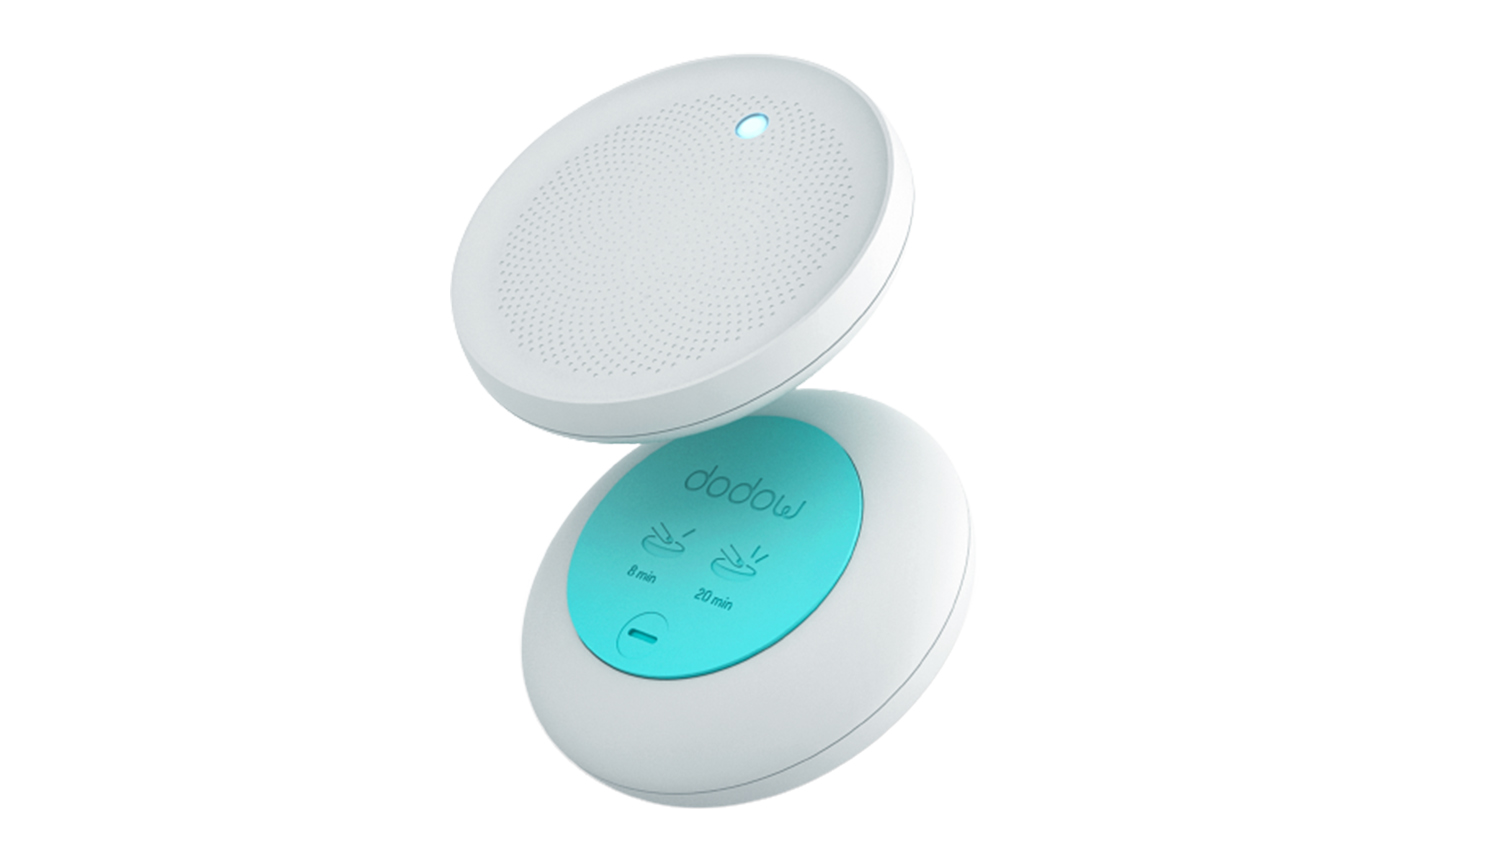 The Dodow sleep device back and front shown on a white background